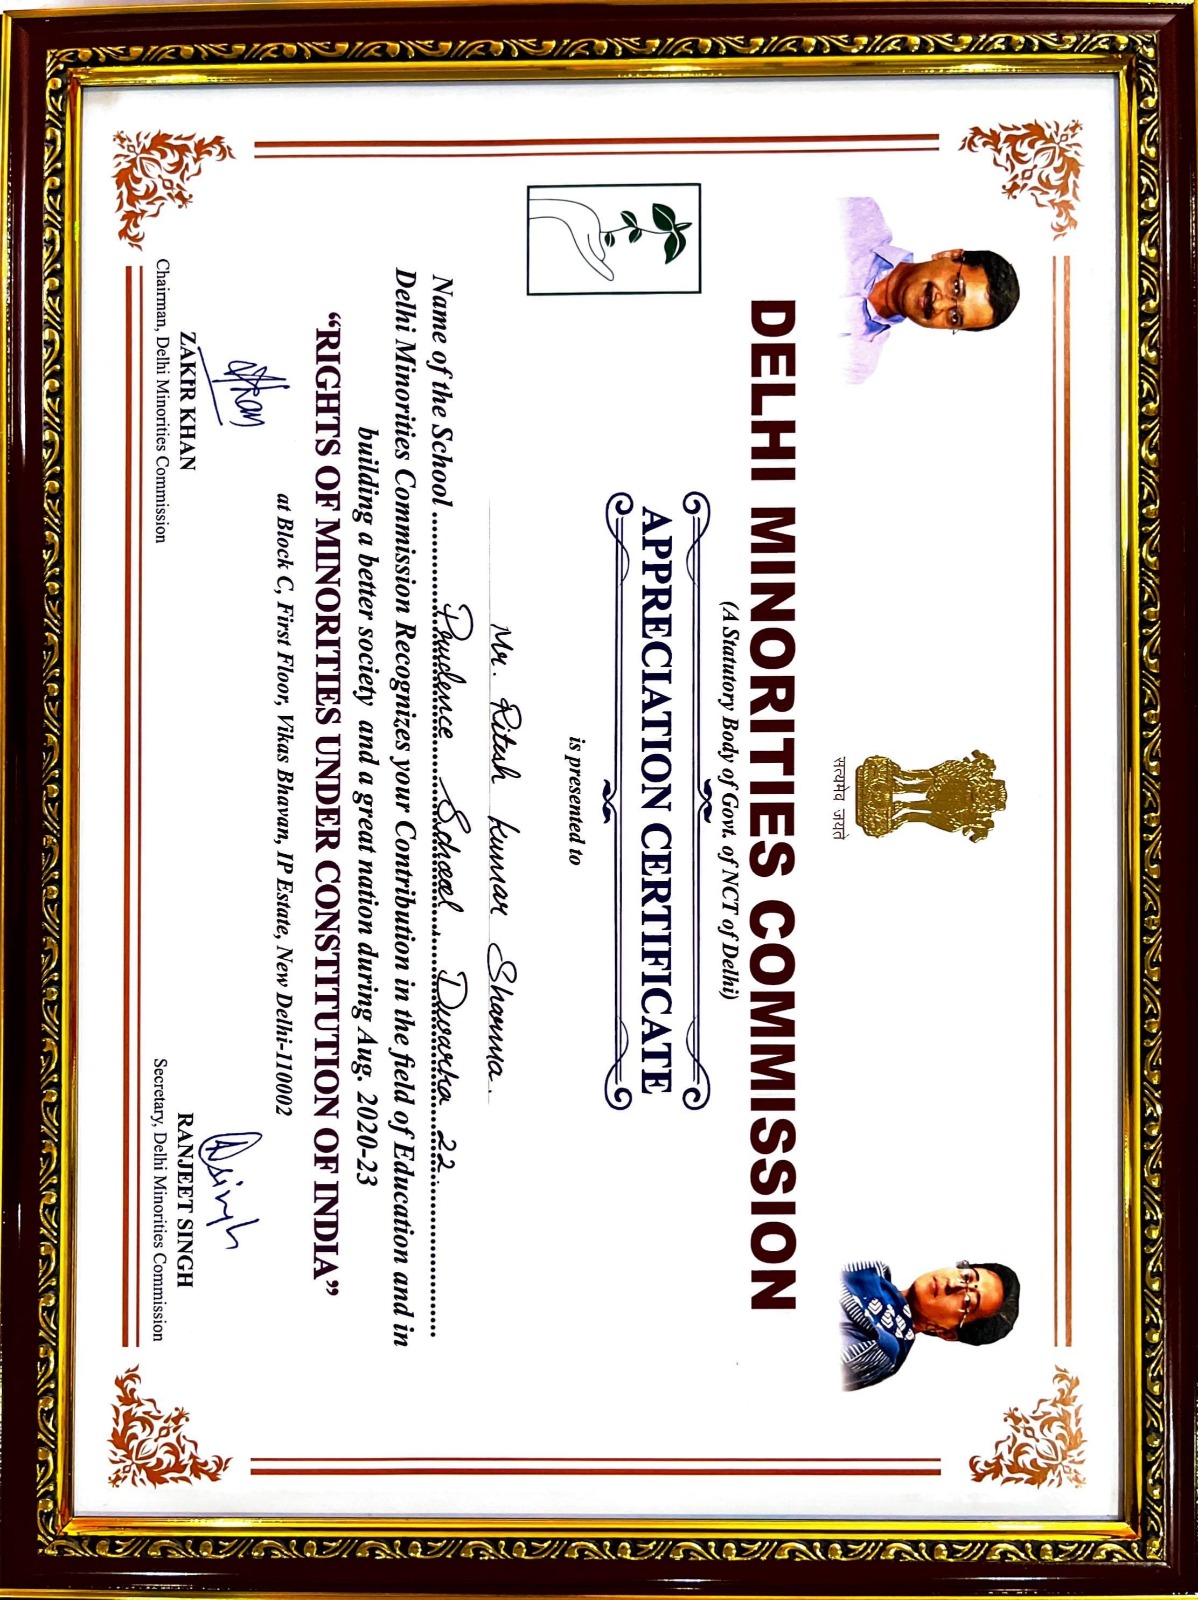 The Delhi Minorities Commission, a statutory body under the Government of NCT of Delhi, proudly awards an Appreciation Certificate to Mr. Ritesh Kumar Sharma of Prudence School, Dwarka Sector-22